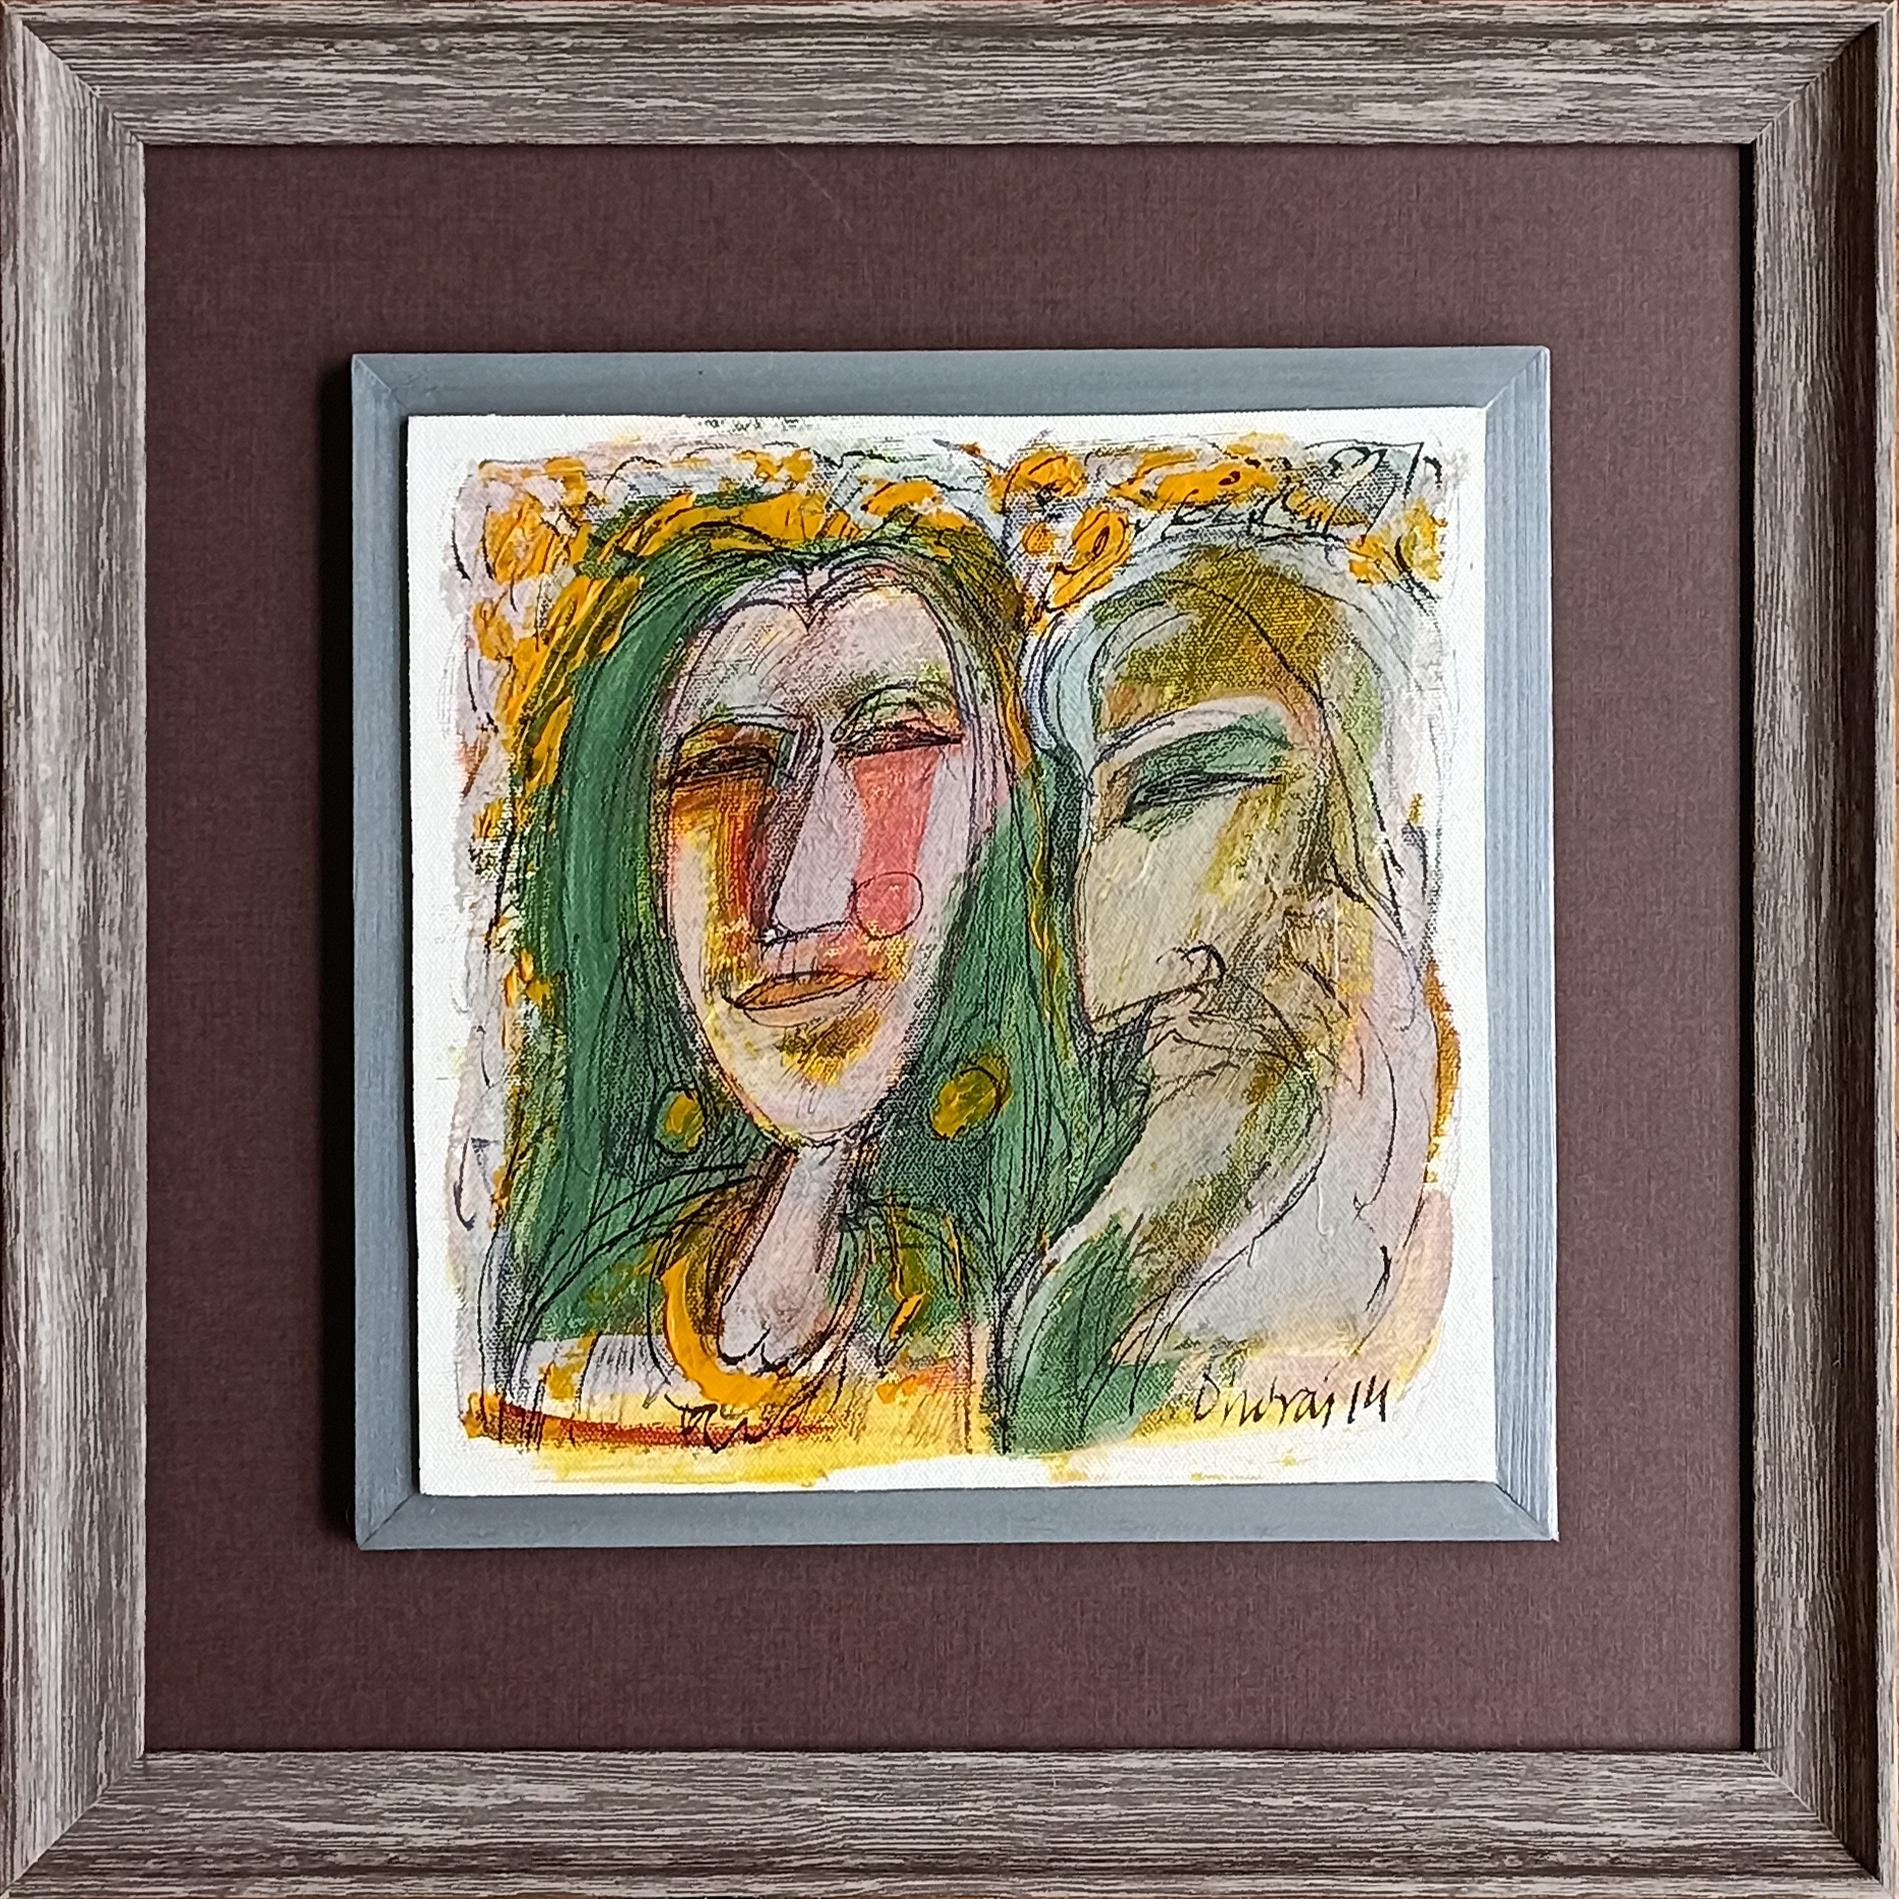 Dhiraj Chowdhury - Urbashi Series - 12 x 12 inches (unframed size)
Acrylic on Board
( Framed & Door Delivered )

Style of the Artist : He steadfastly believes that art has to be closely associated with life – with humanity, with humanism. And he